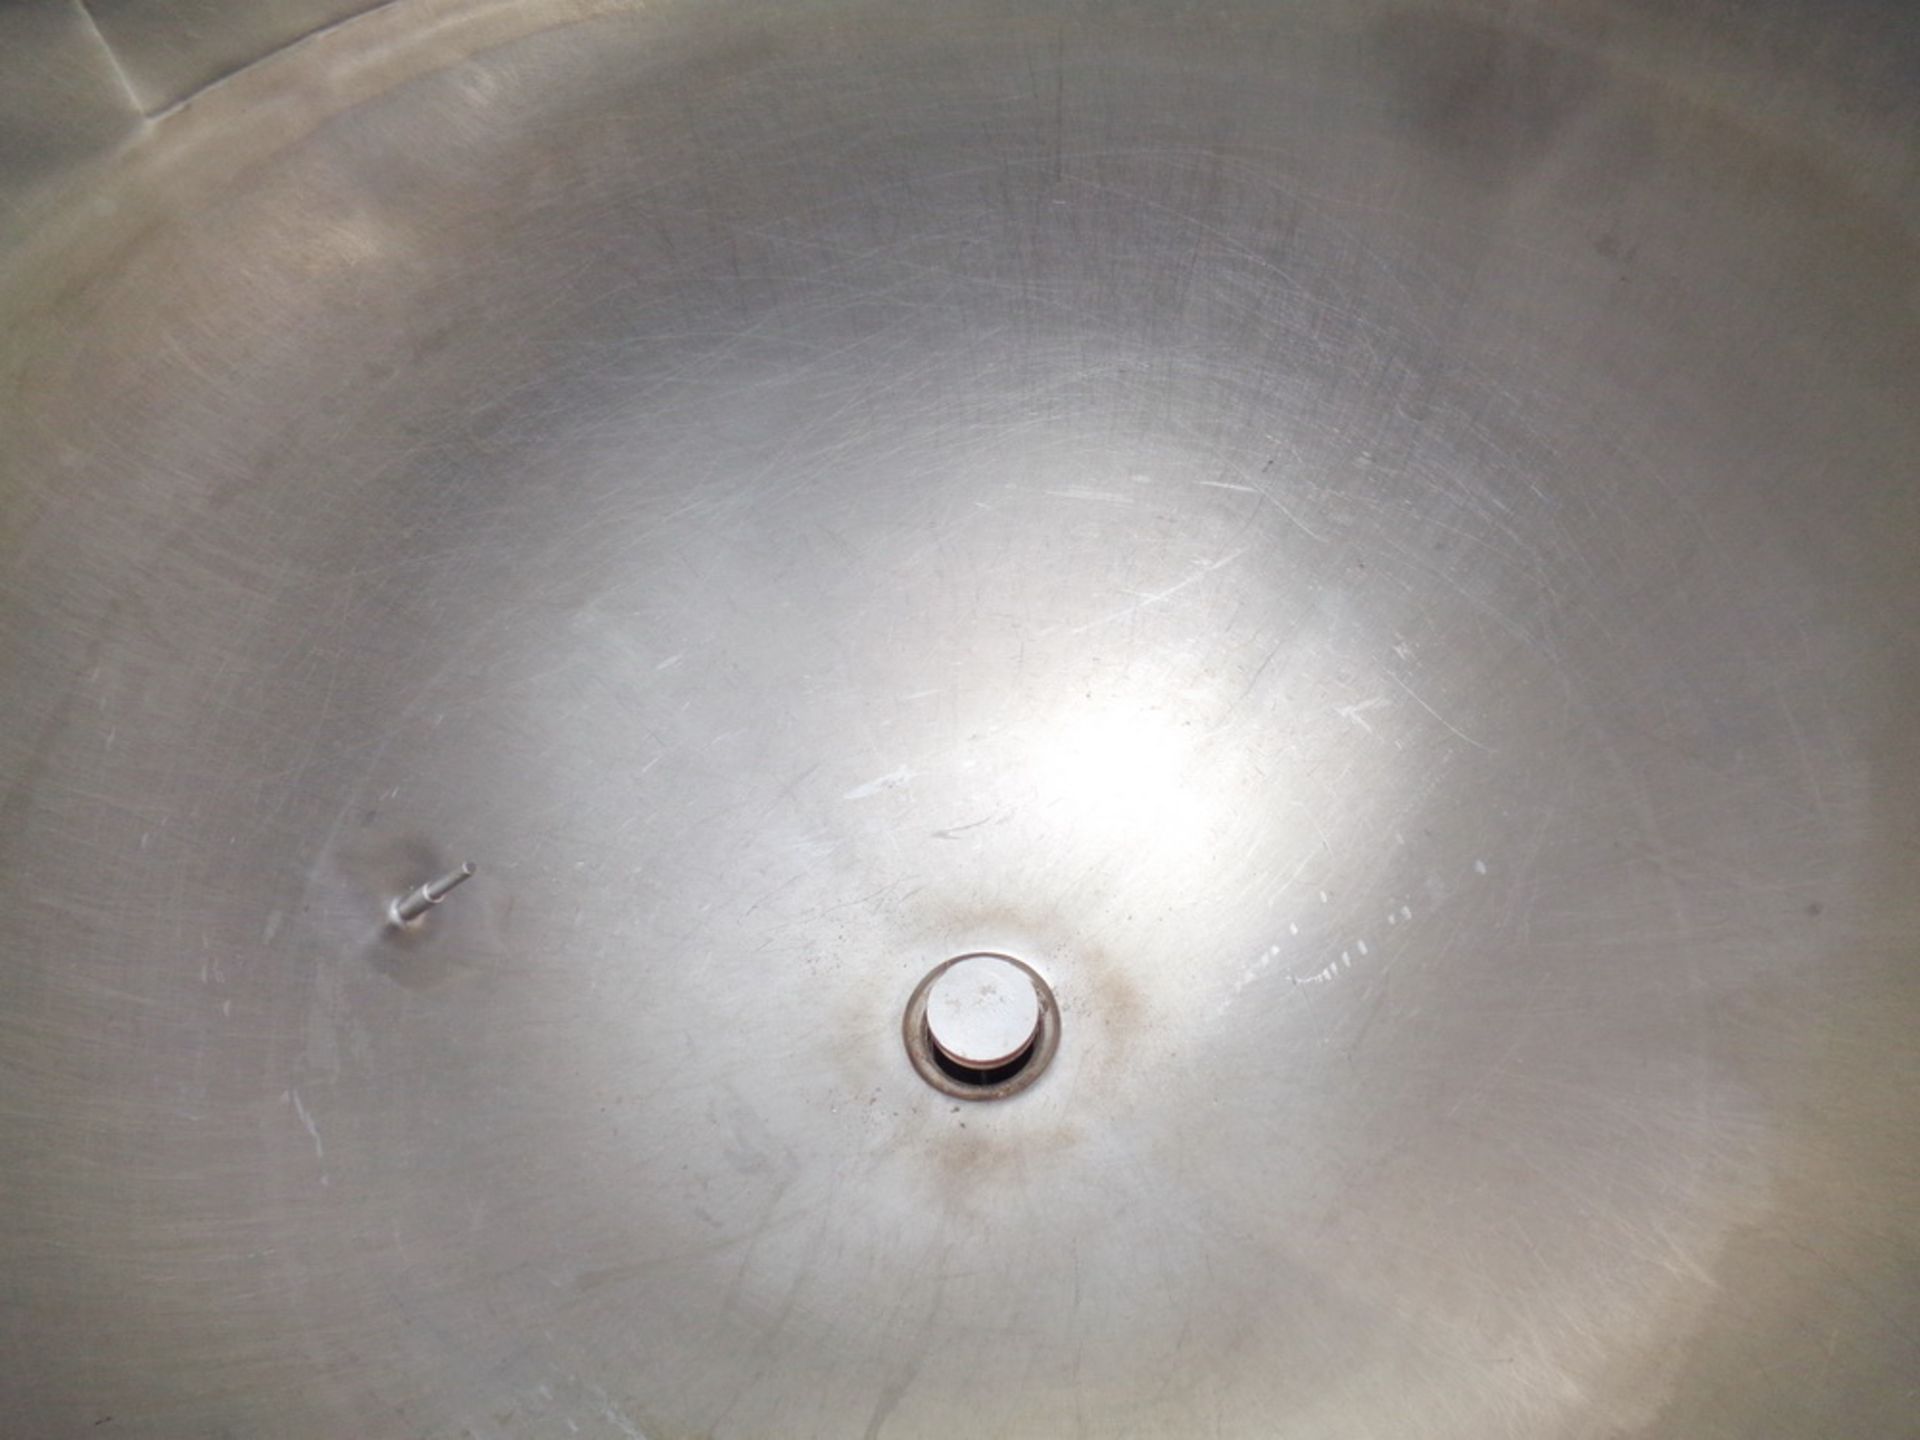 Lee 300 gallon Stainless Steel Jacketed Kettle, Model 300D, S/N A-5041-A, NB# 2165 - Image 2 of 6